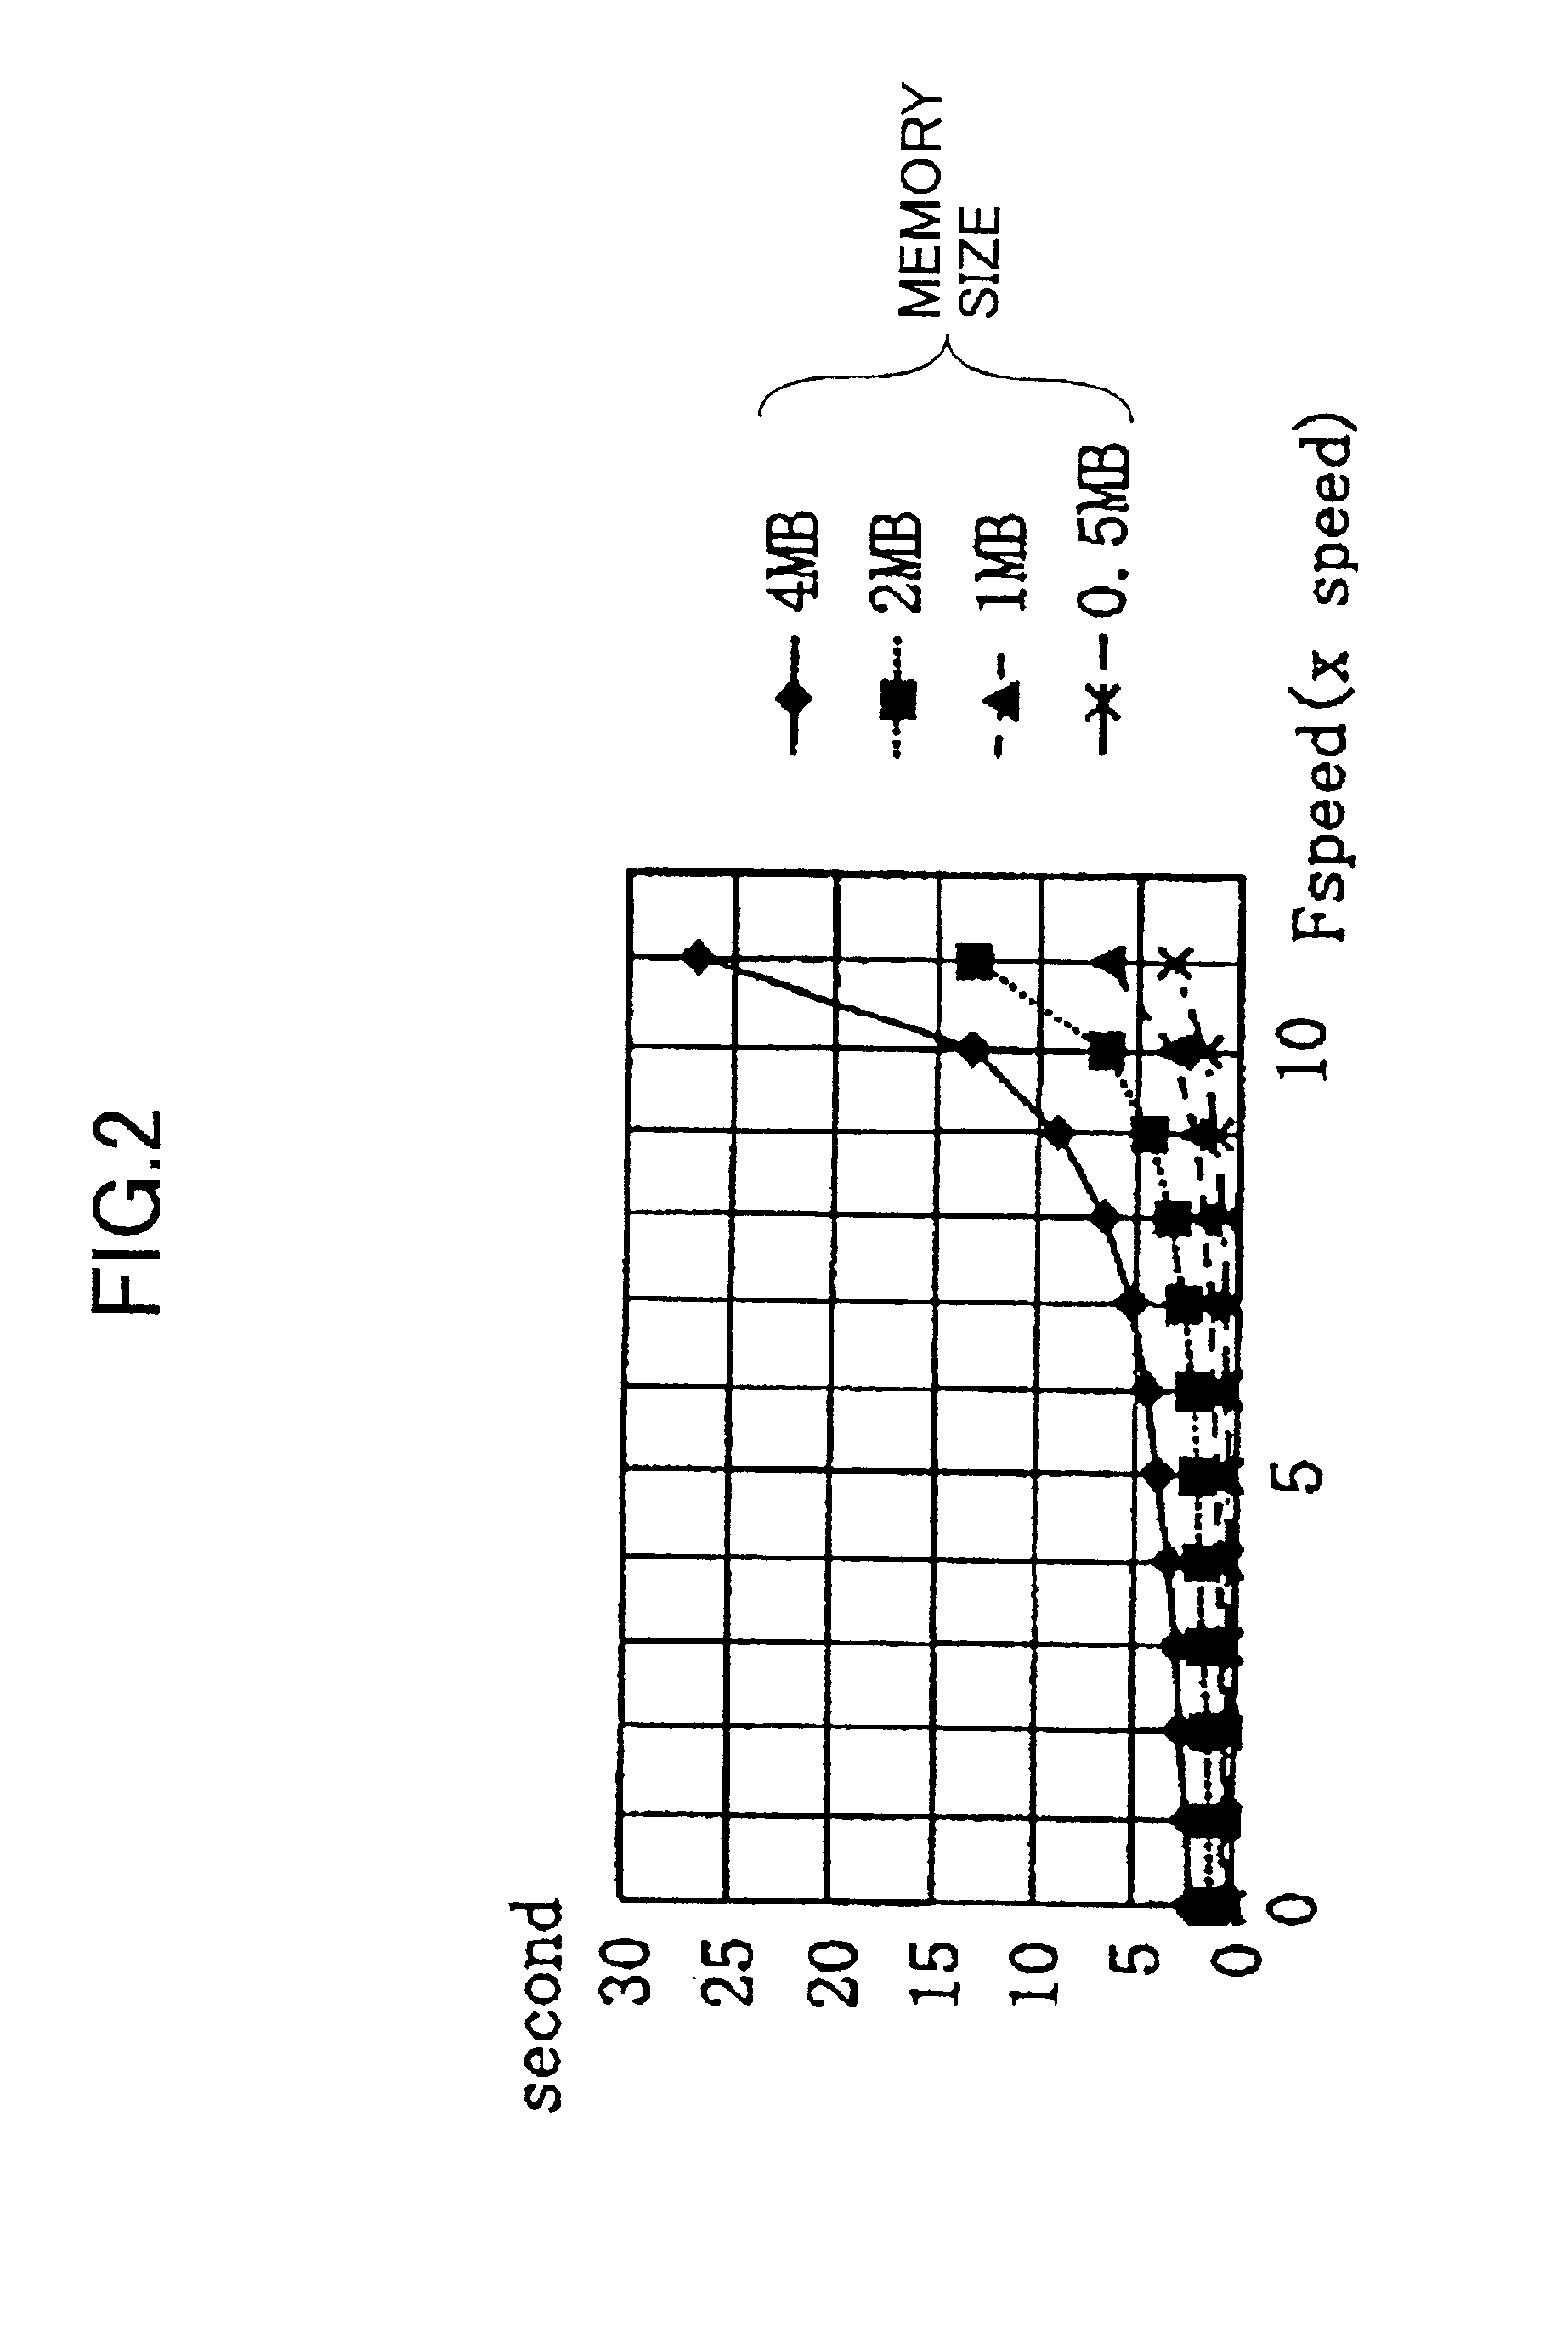 Information recording apparatus and method for controlling data writing rate based on data transfer rate so as to improve data writing performance